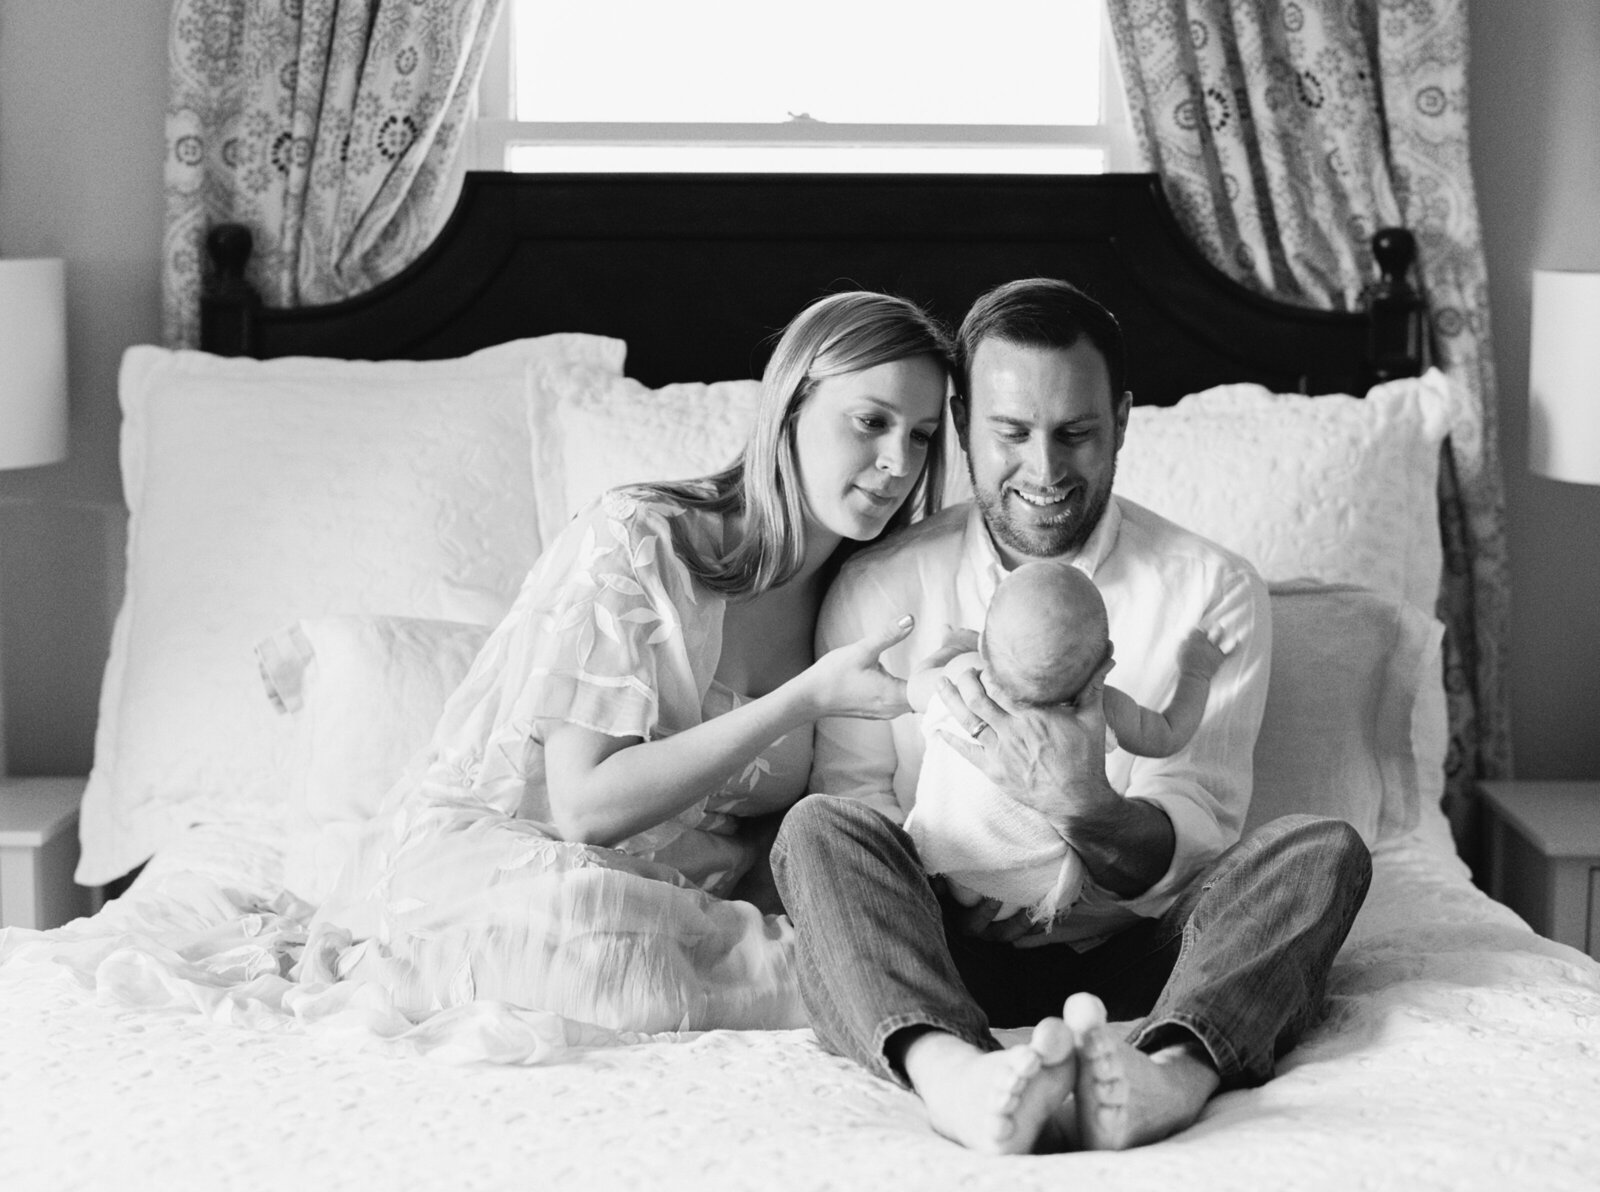 Mother and Father photograph with newborn baby